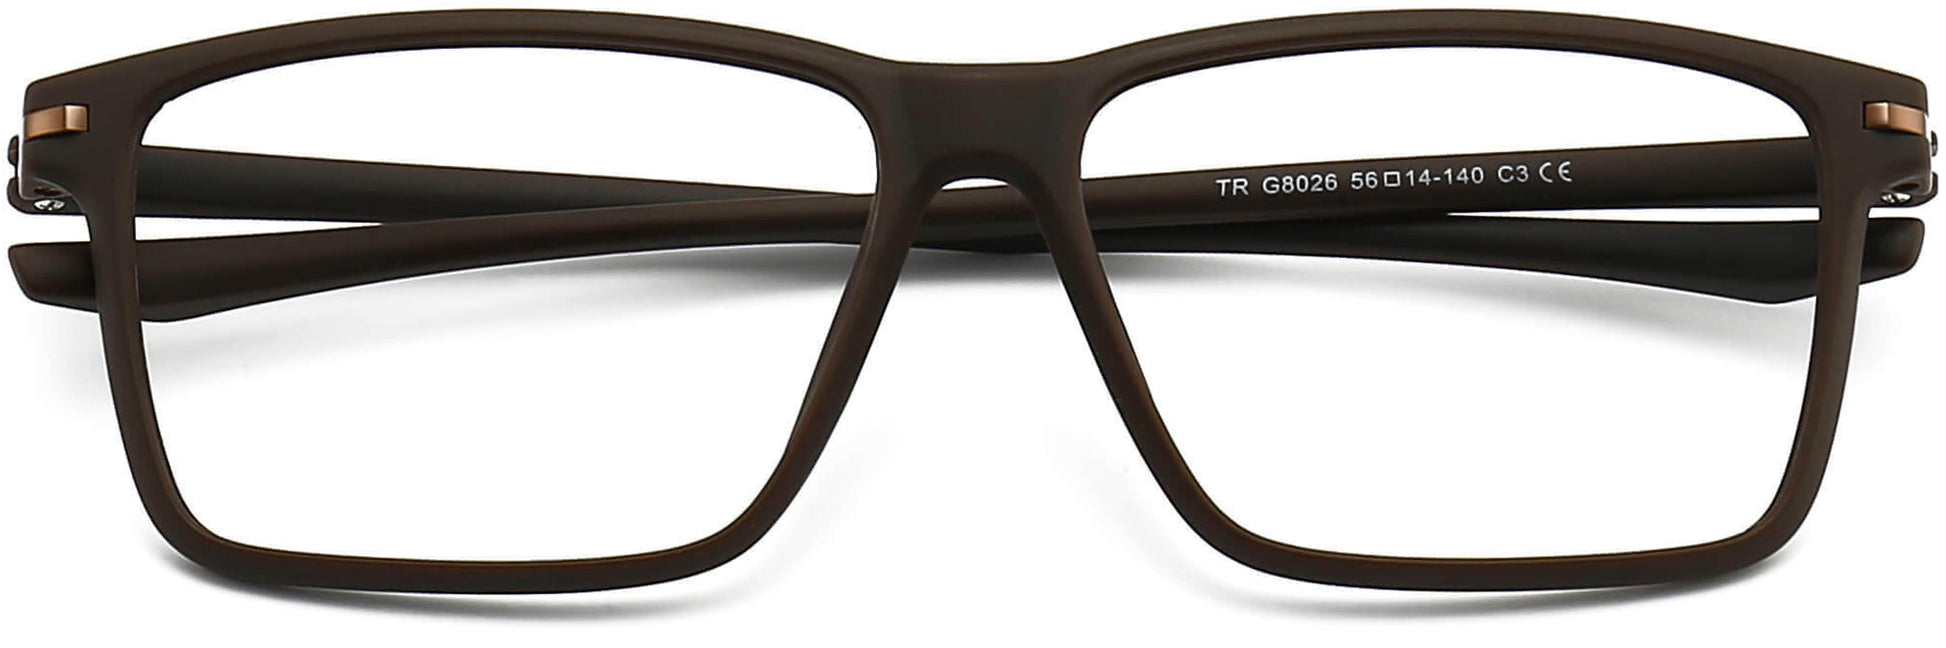 Kaiden Rectangle Brown Eyeglasses from ANRRI, closed view